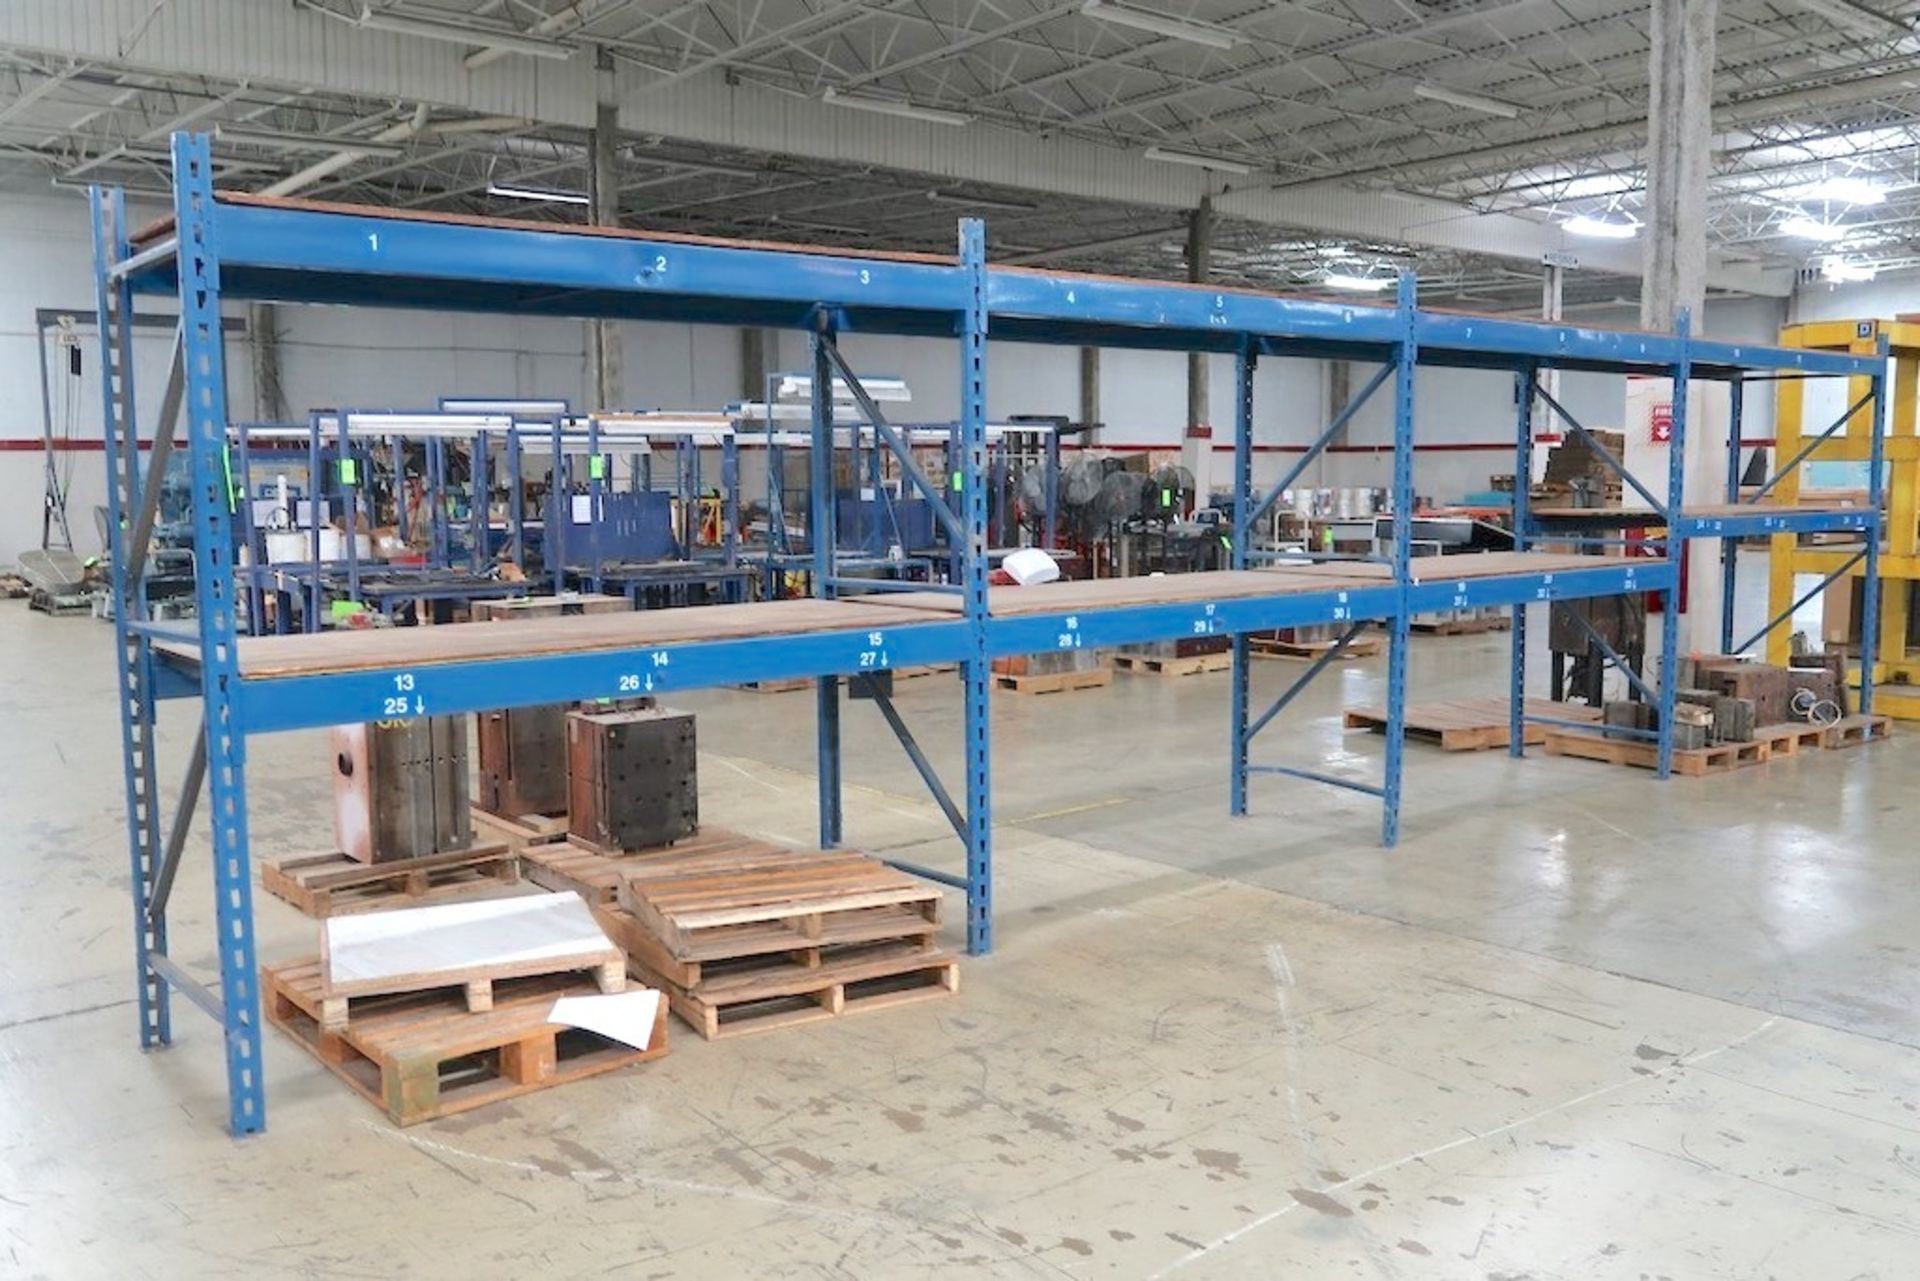 7-Sections of Pallet Racking